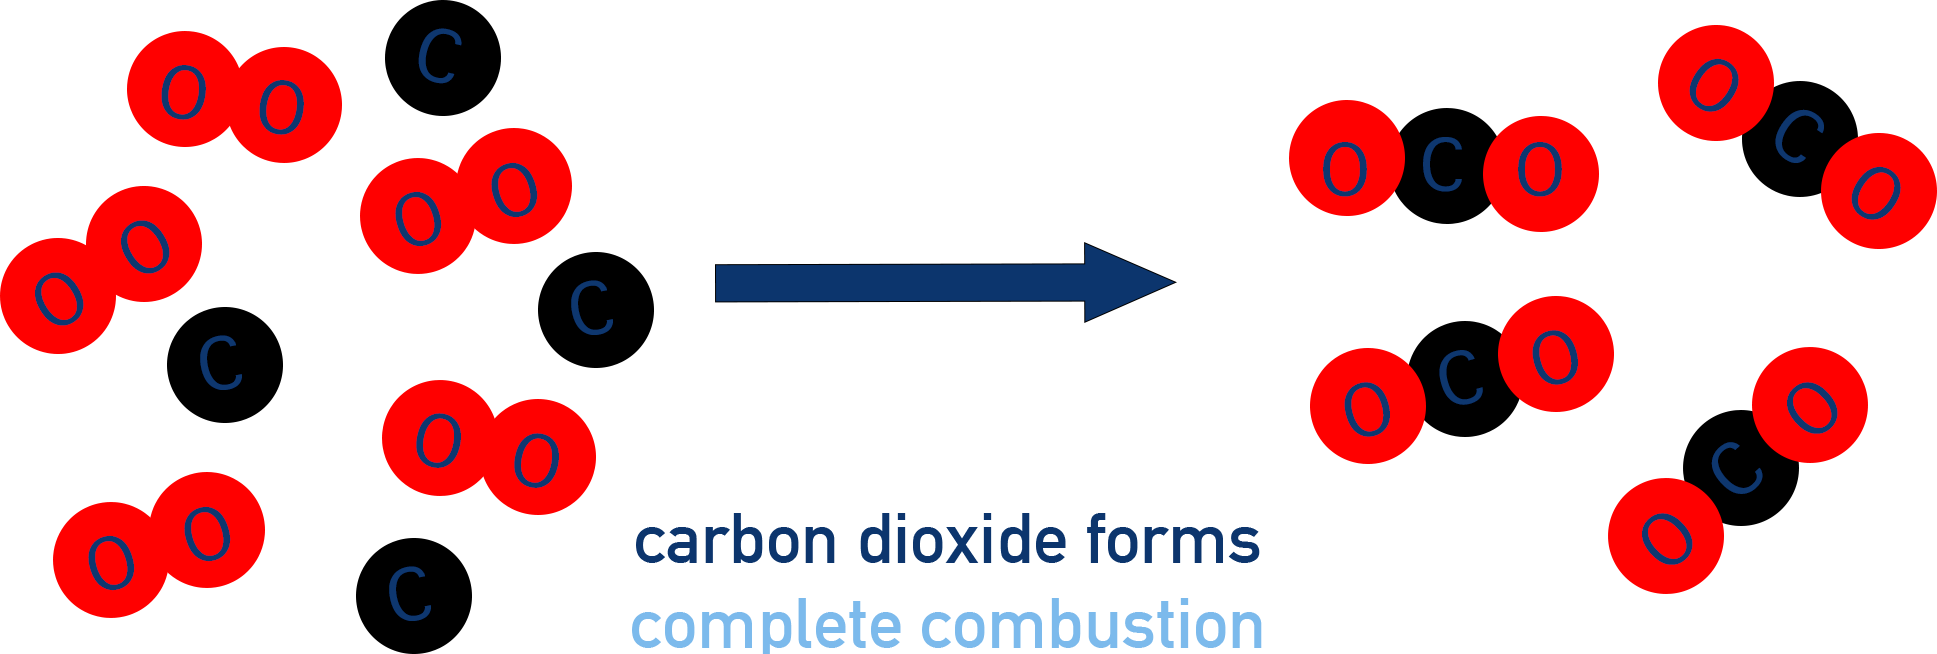 Carbon dioxide complete combustion alkane a-level chemistry